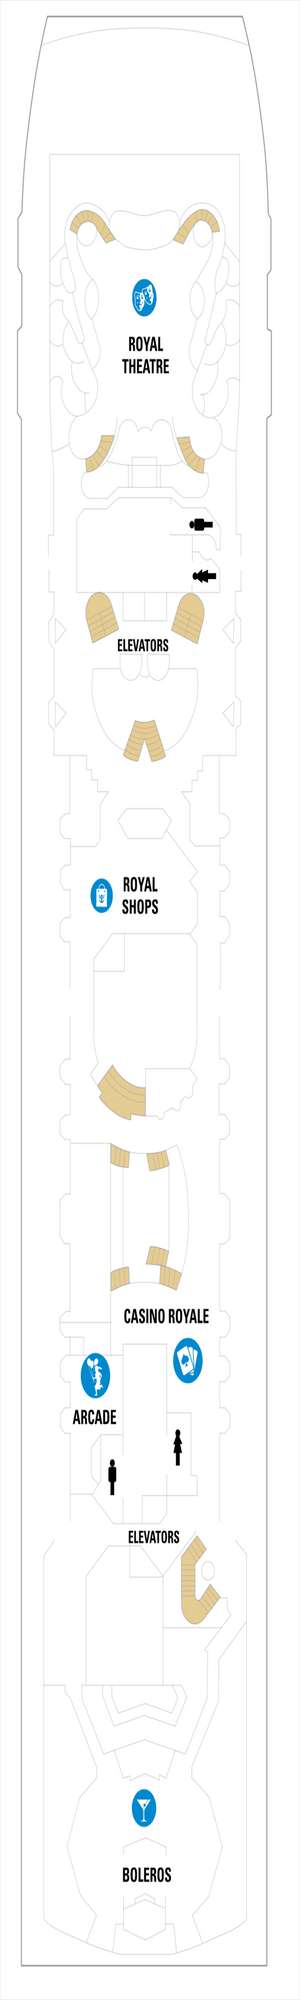 Deck plan for Empress of the Seas